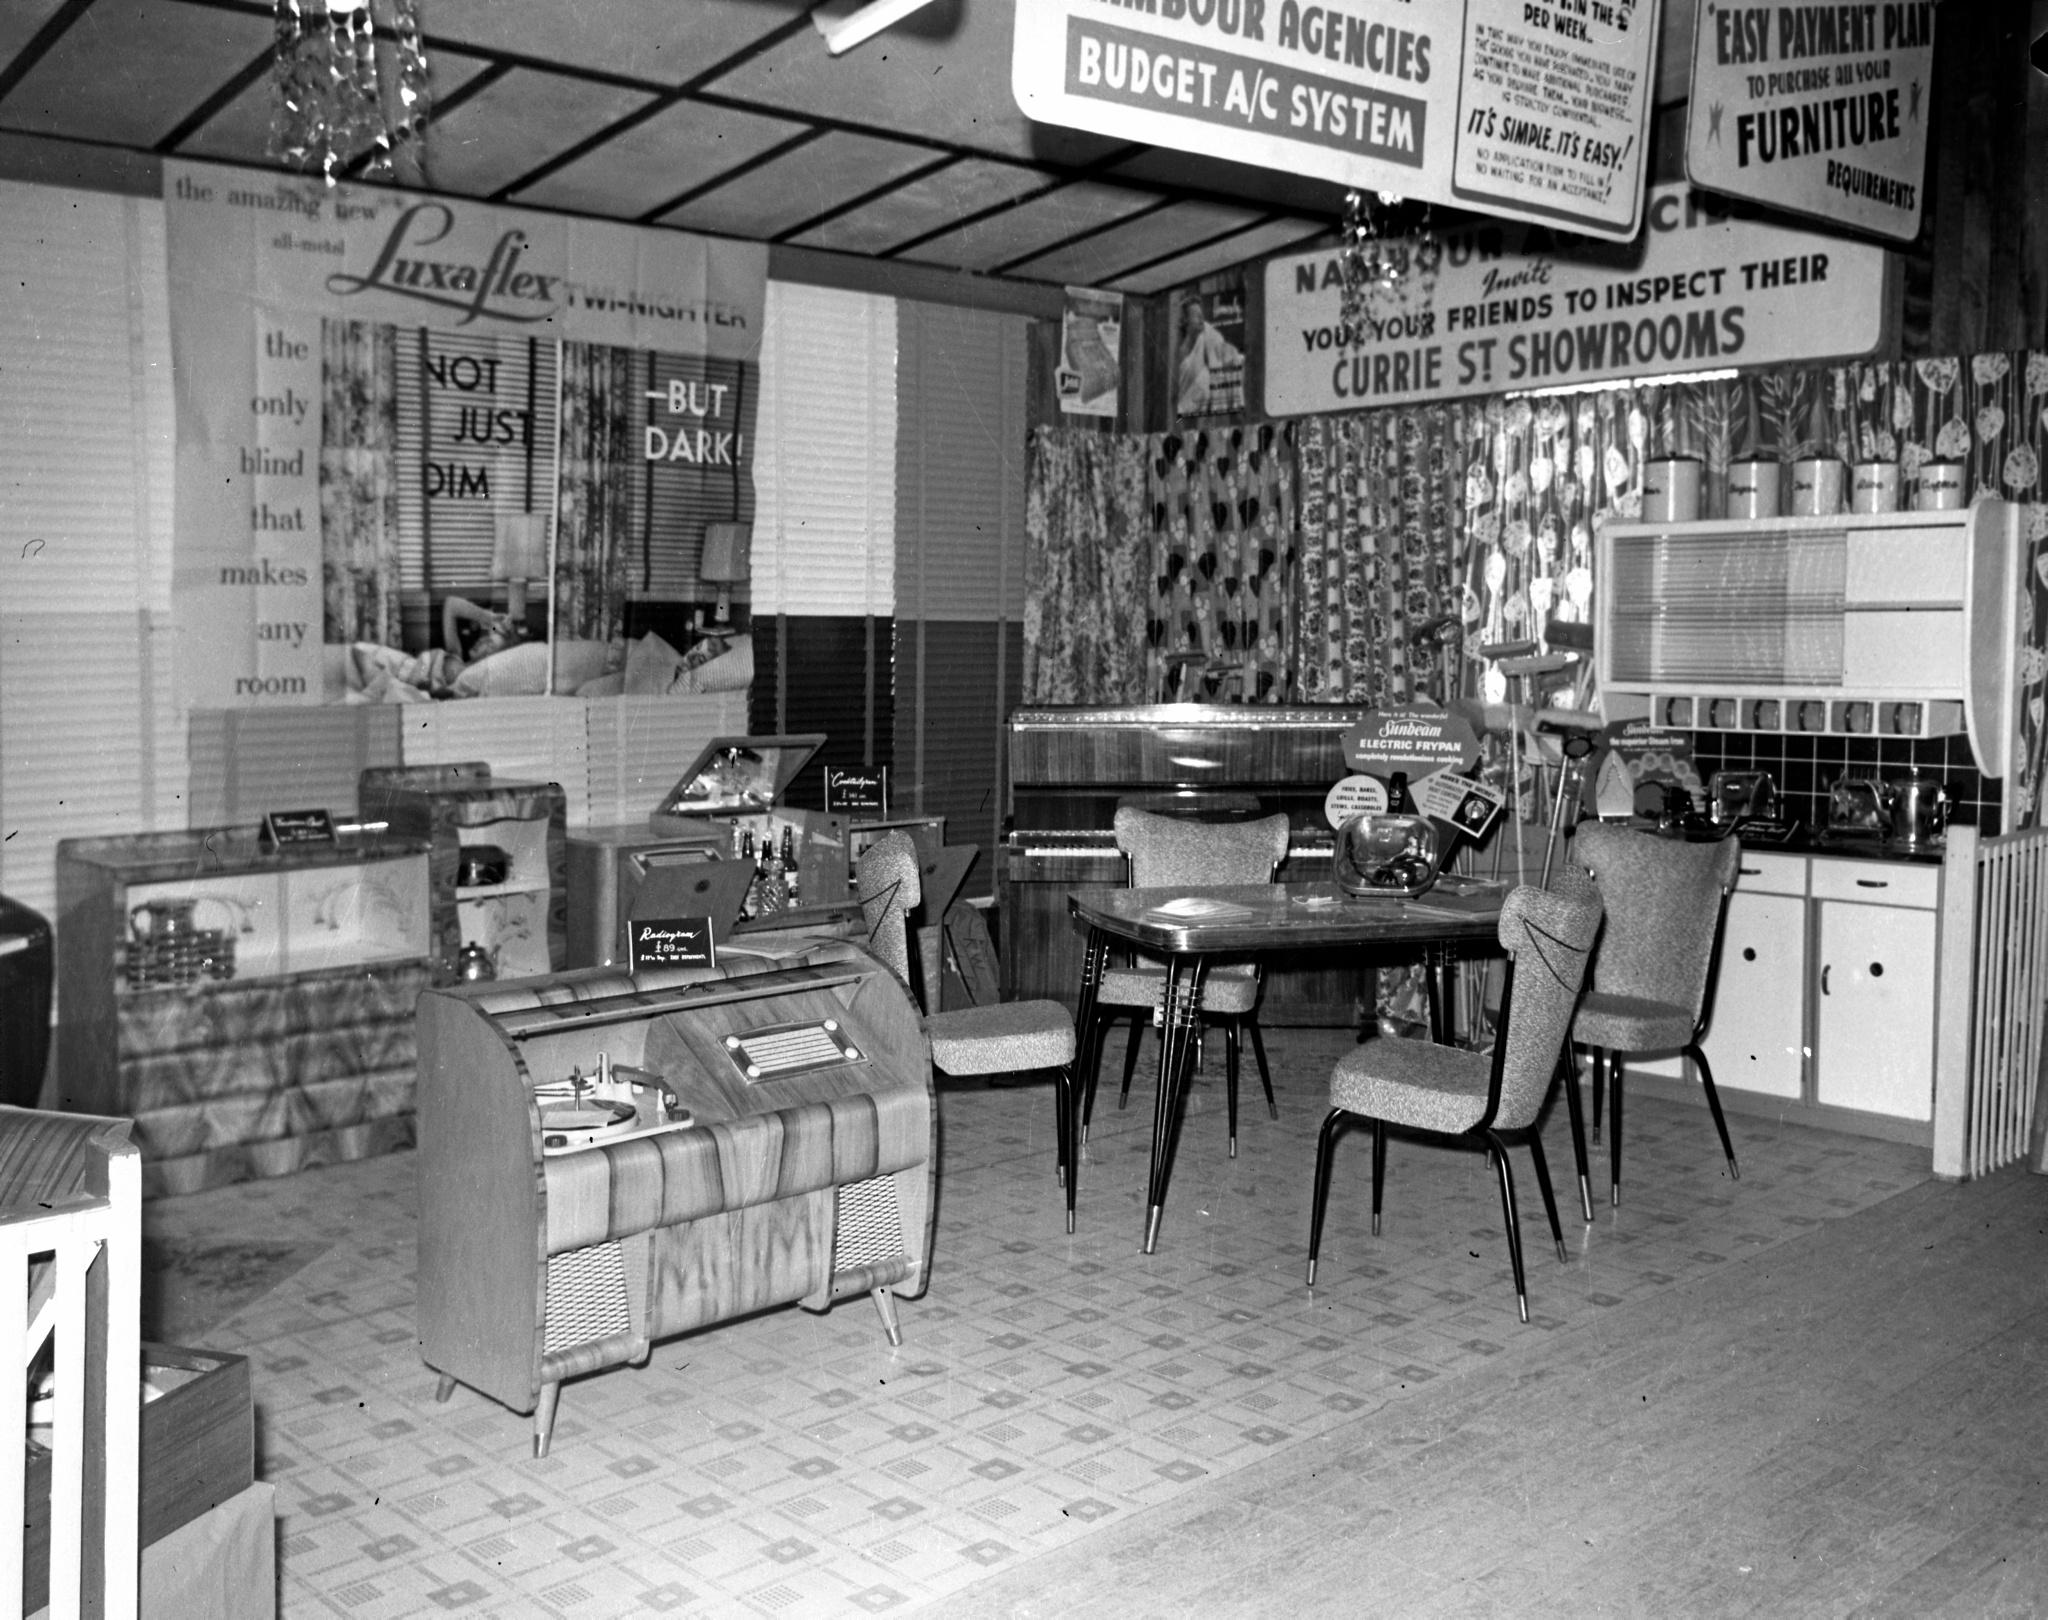 Nambour Agencies house hold furniture and furnishings display, Nambour Showgrounds, 1958.